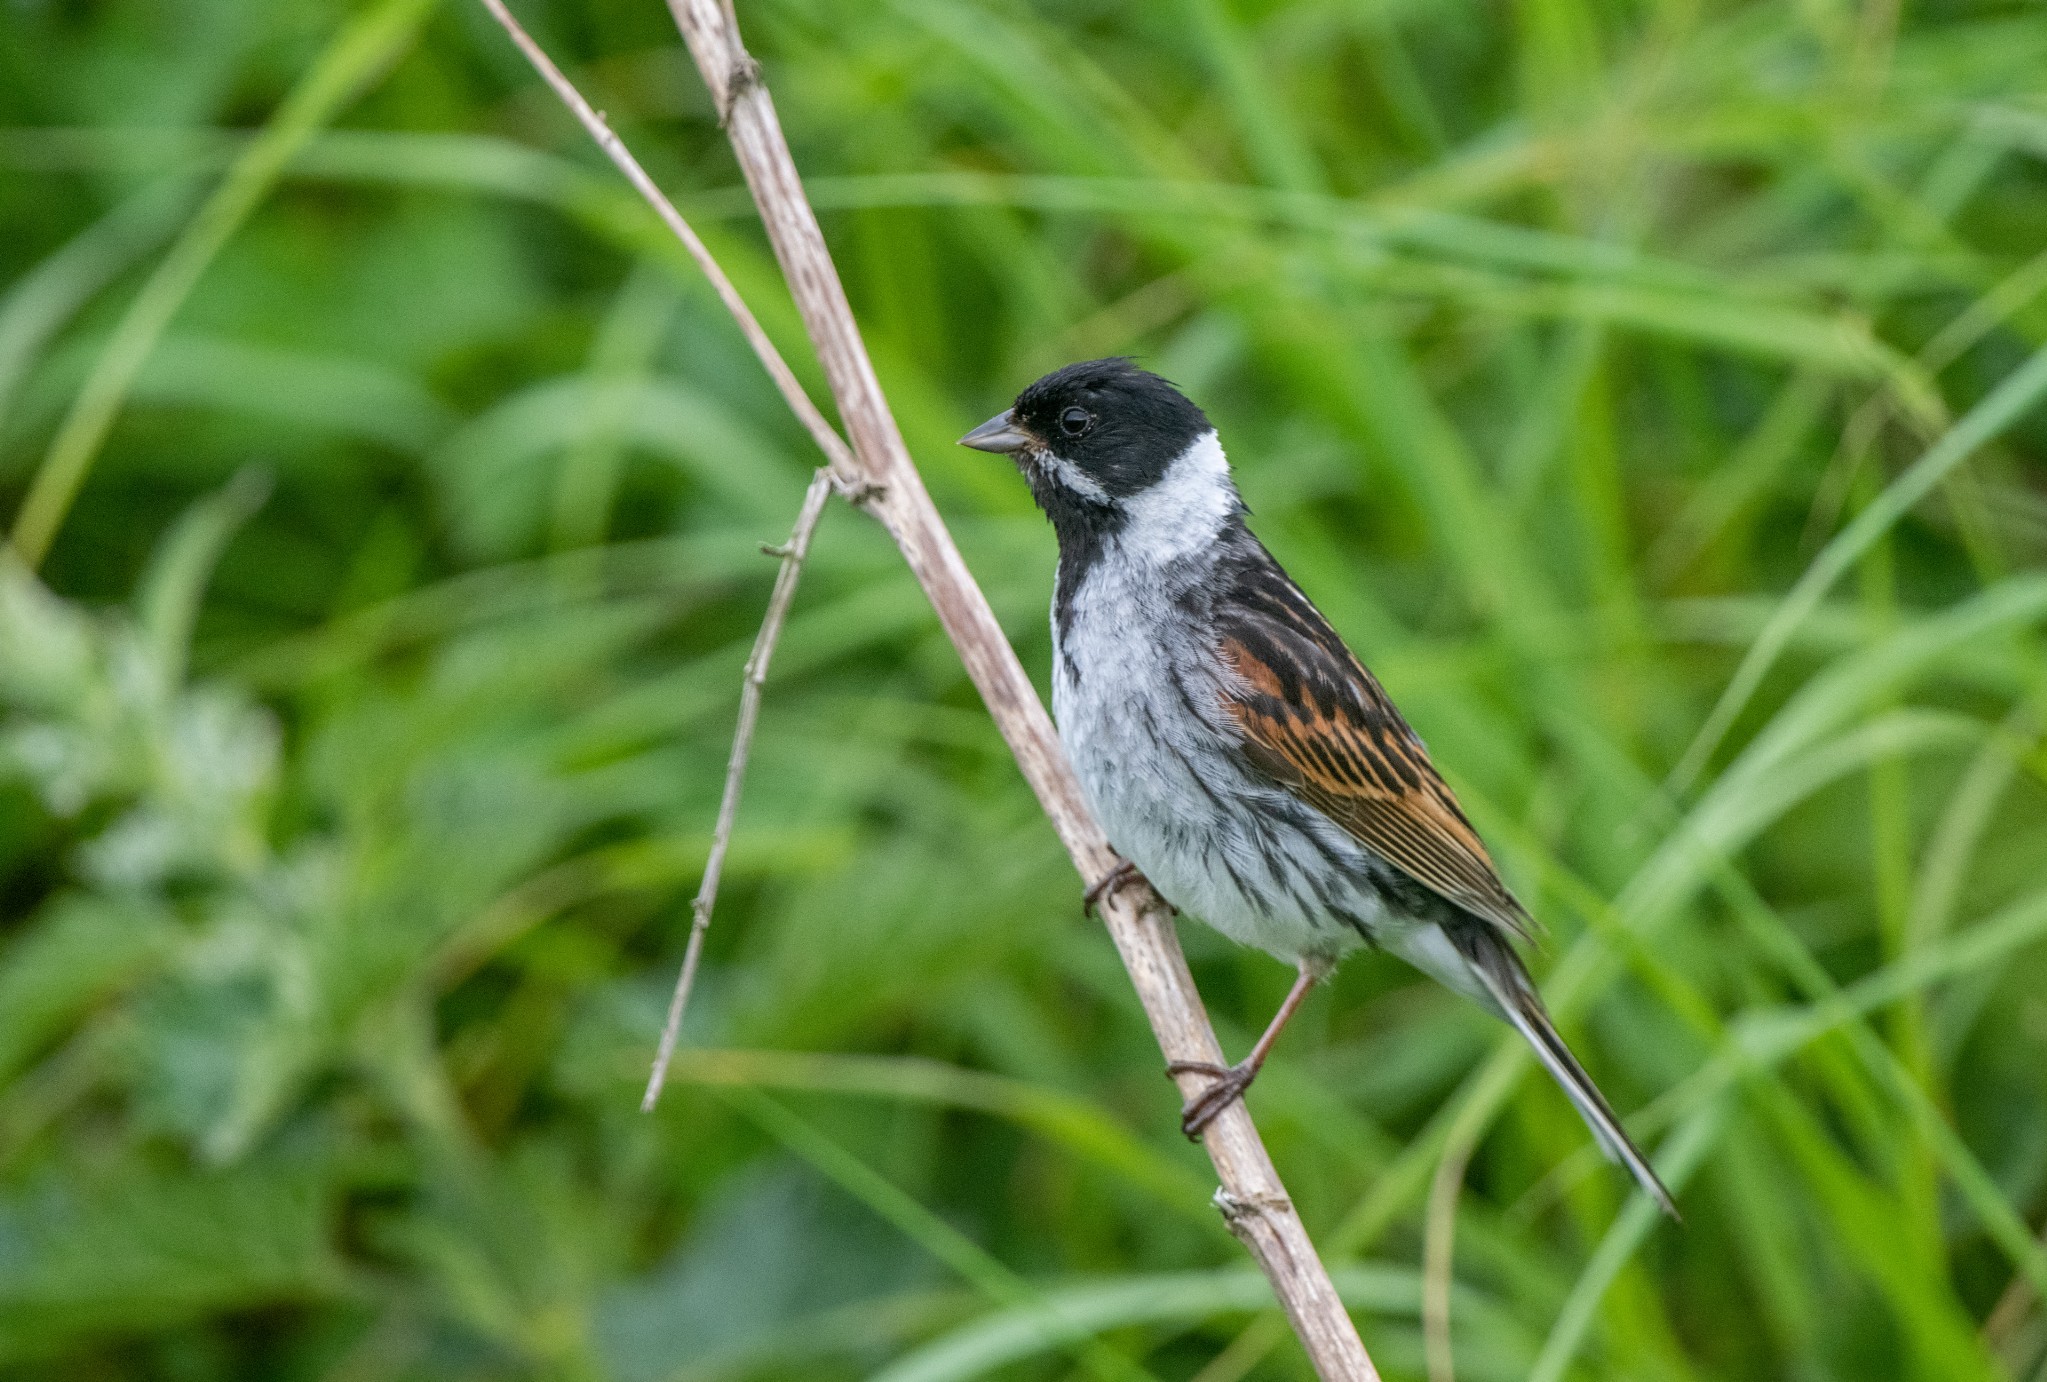 Reed bunting at Inganess, Orkney - image by Raymond Besant